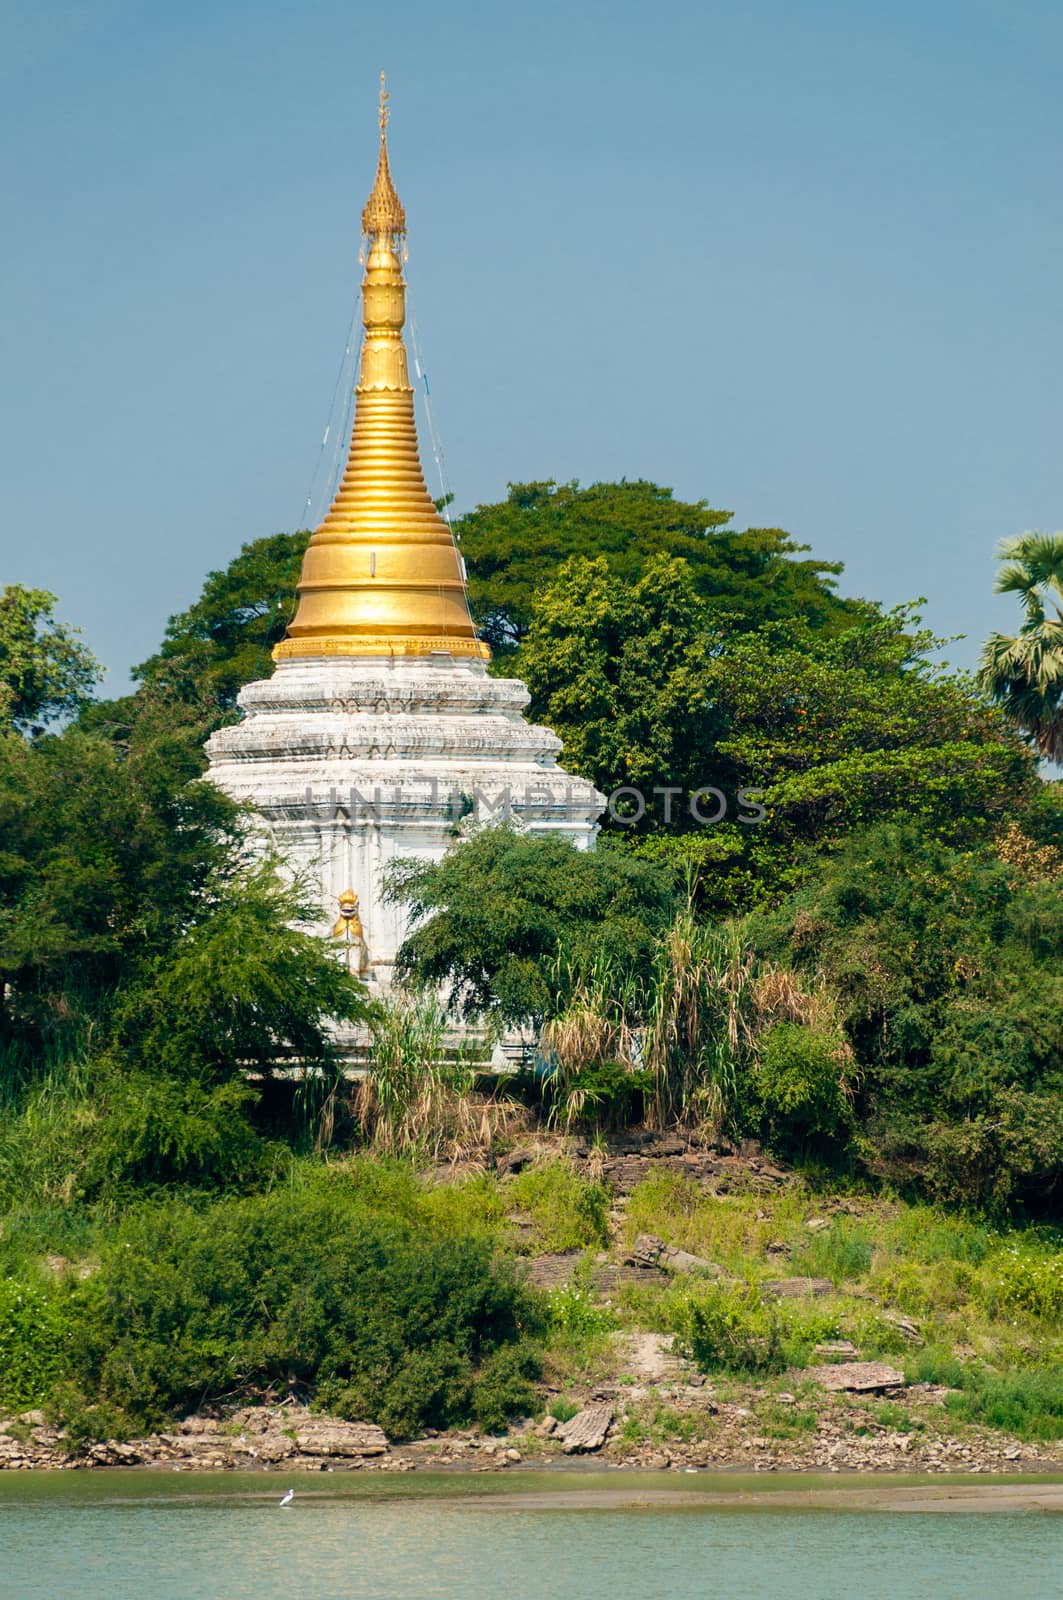 Gold white Pagoda Stupa at Irrawaddy river between trees by attiarndt